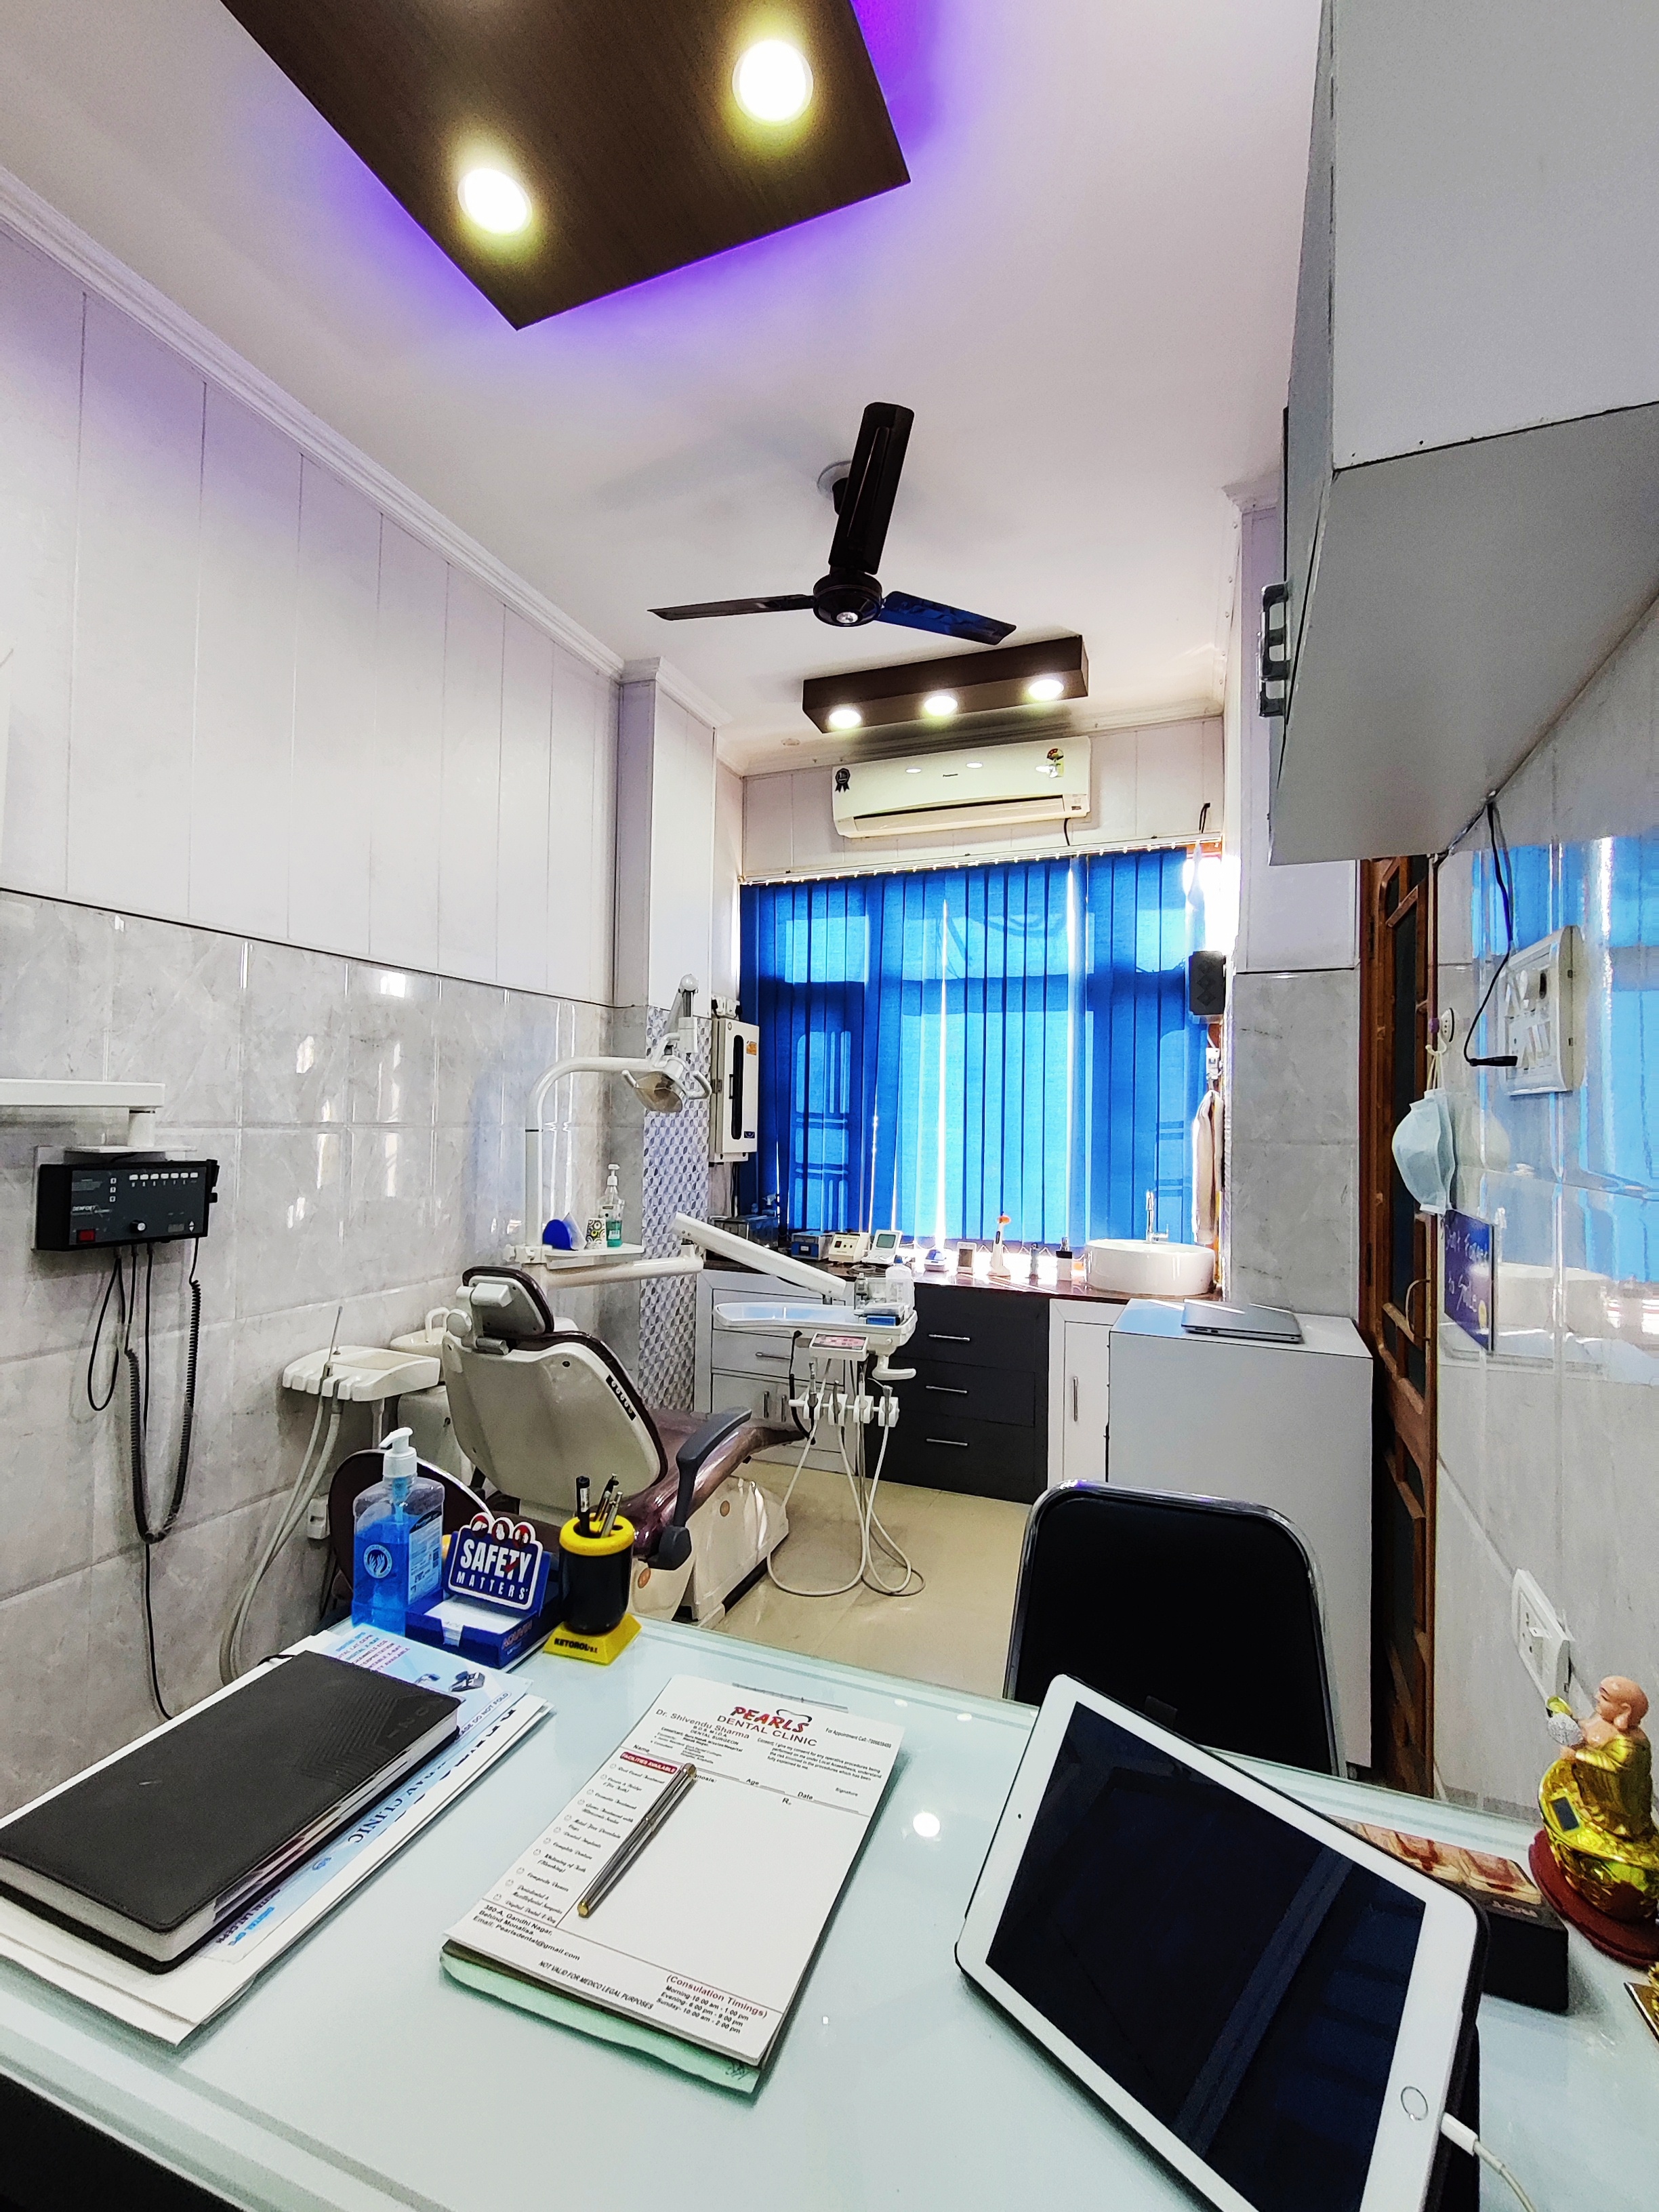 PEARLS DENTAL CLINIC|Veterinary|Medical Services